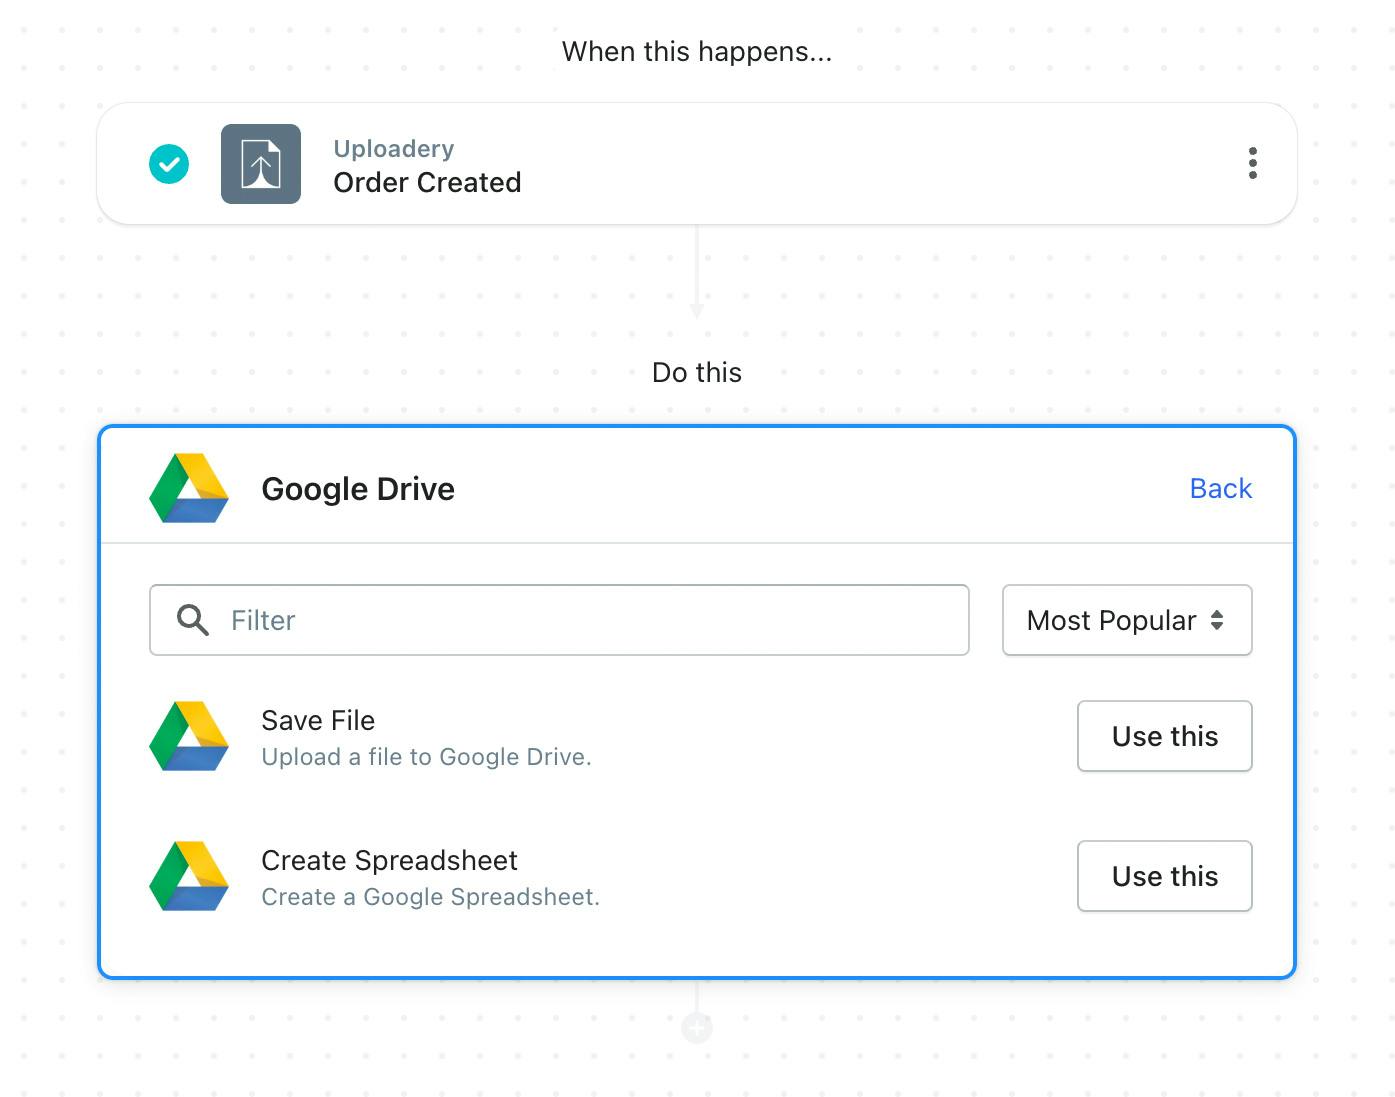 Uploadery to Google Drive workflow